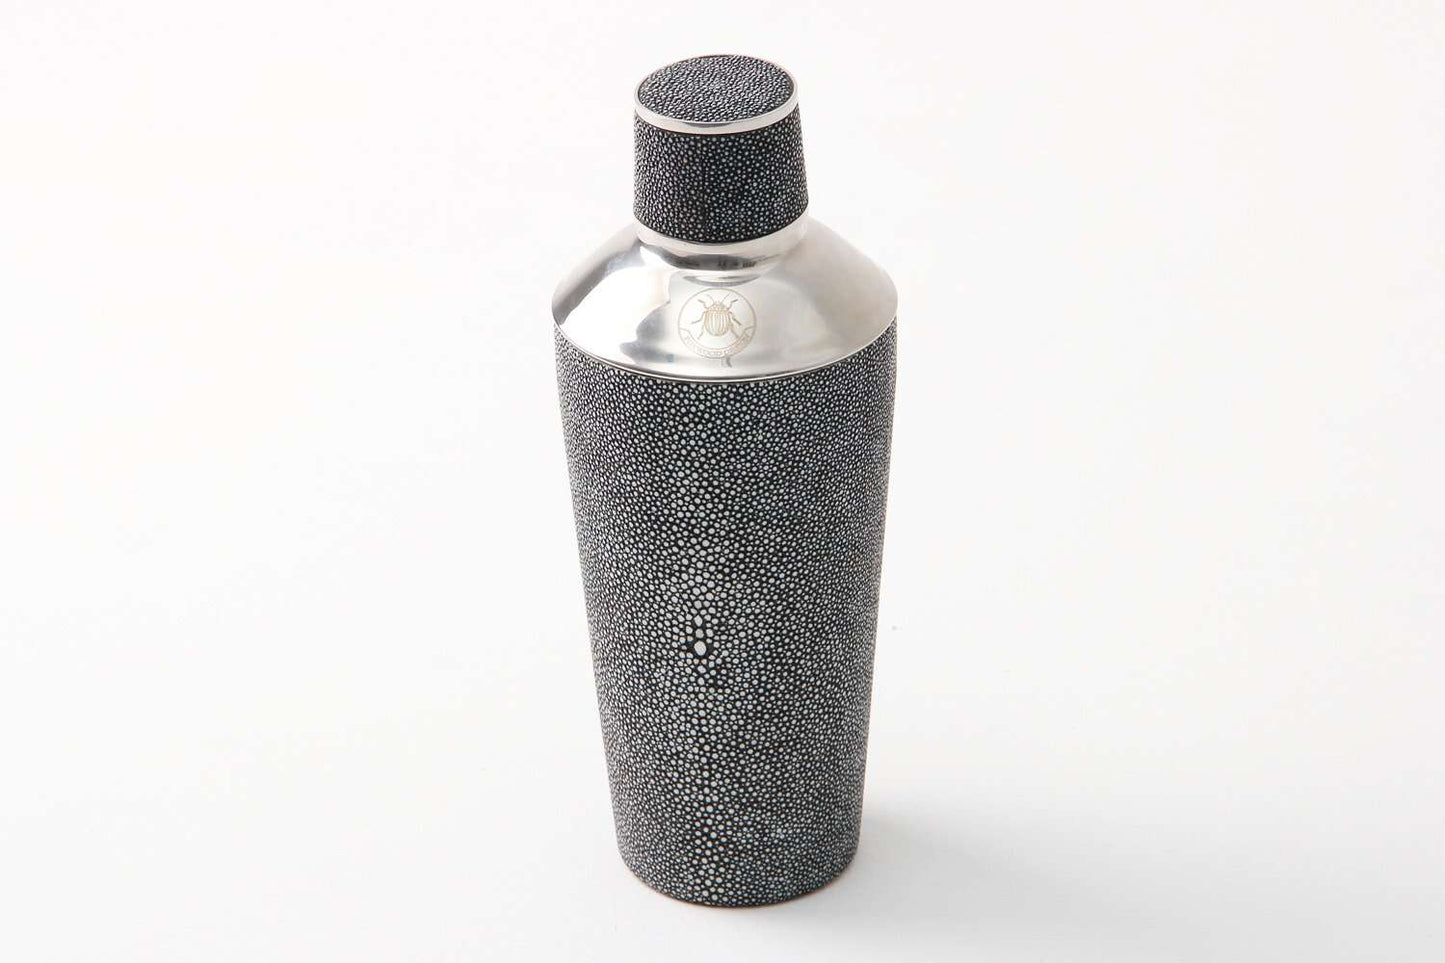 Cocktail Shaker in Charcoal Shagreen